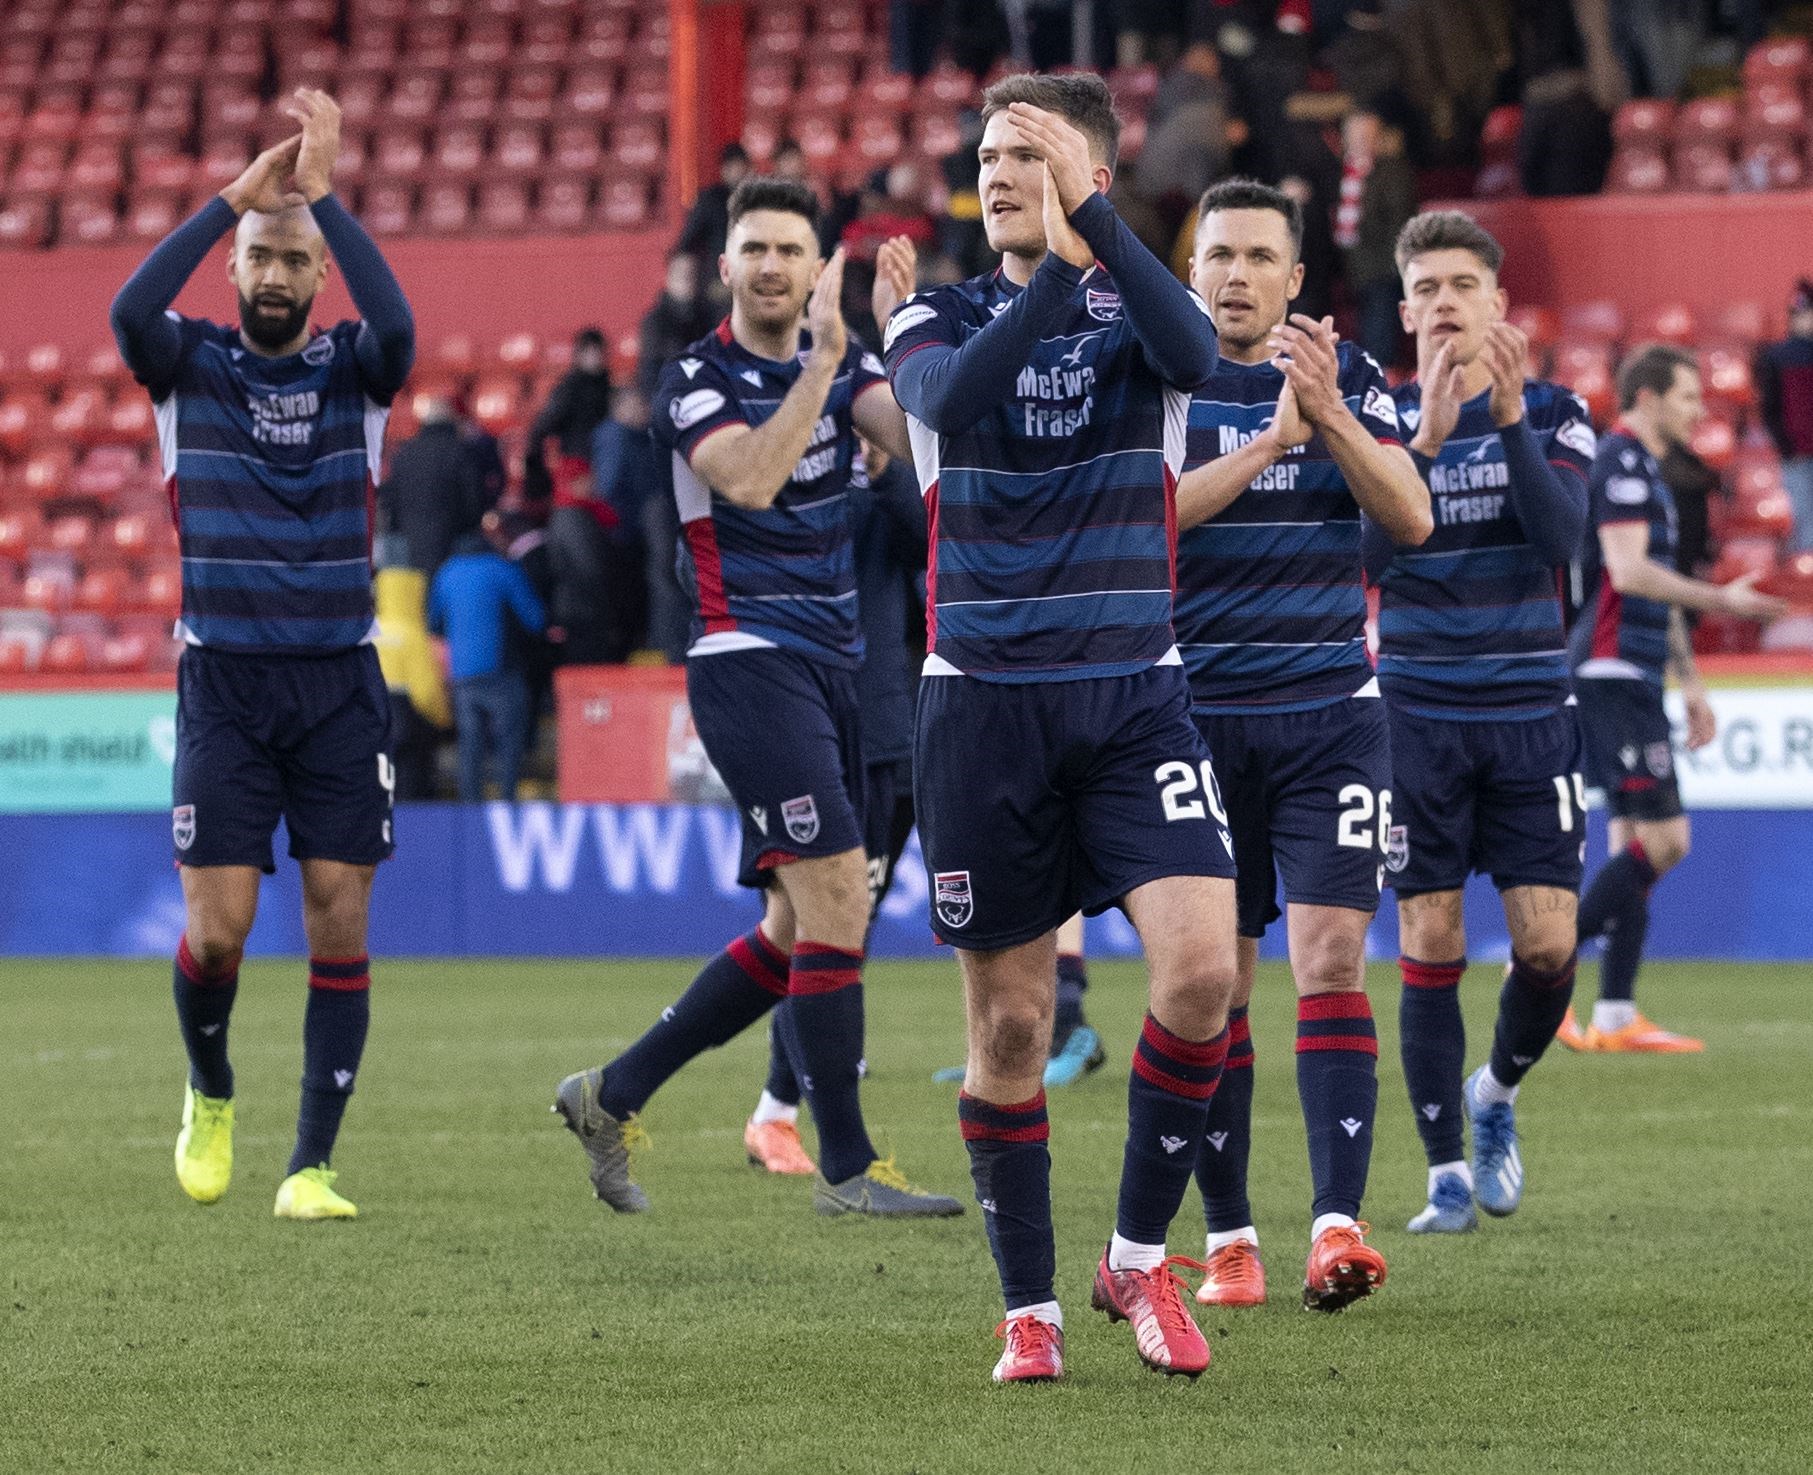 Picture - Ken Macpherson, Inverness. Aberdeen(1) v Ross County(2). 22.02.20. The Ross County players celebrate to their fans at the end.